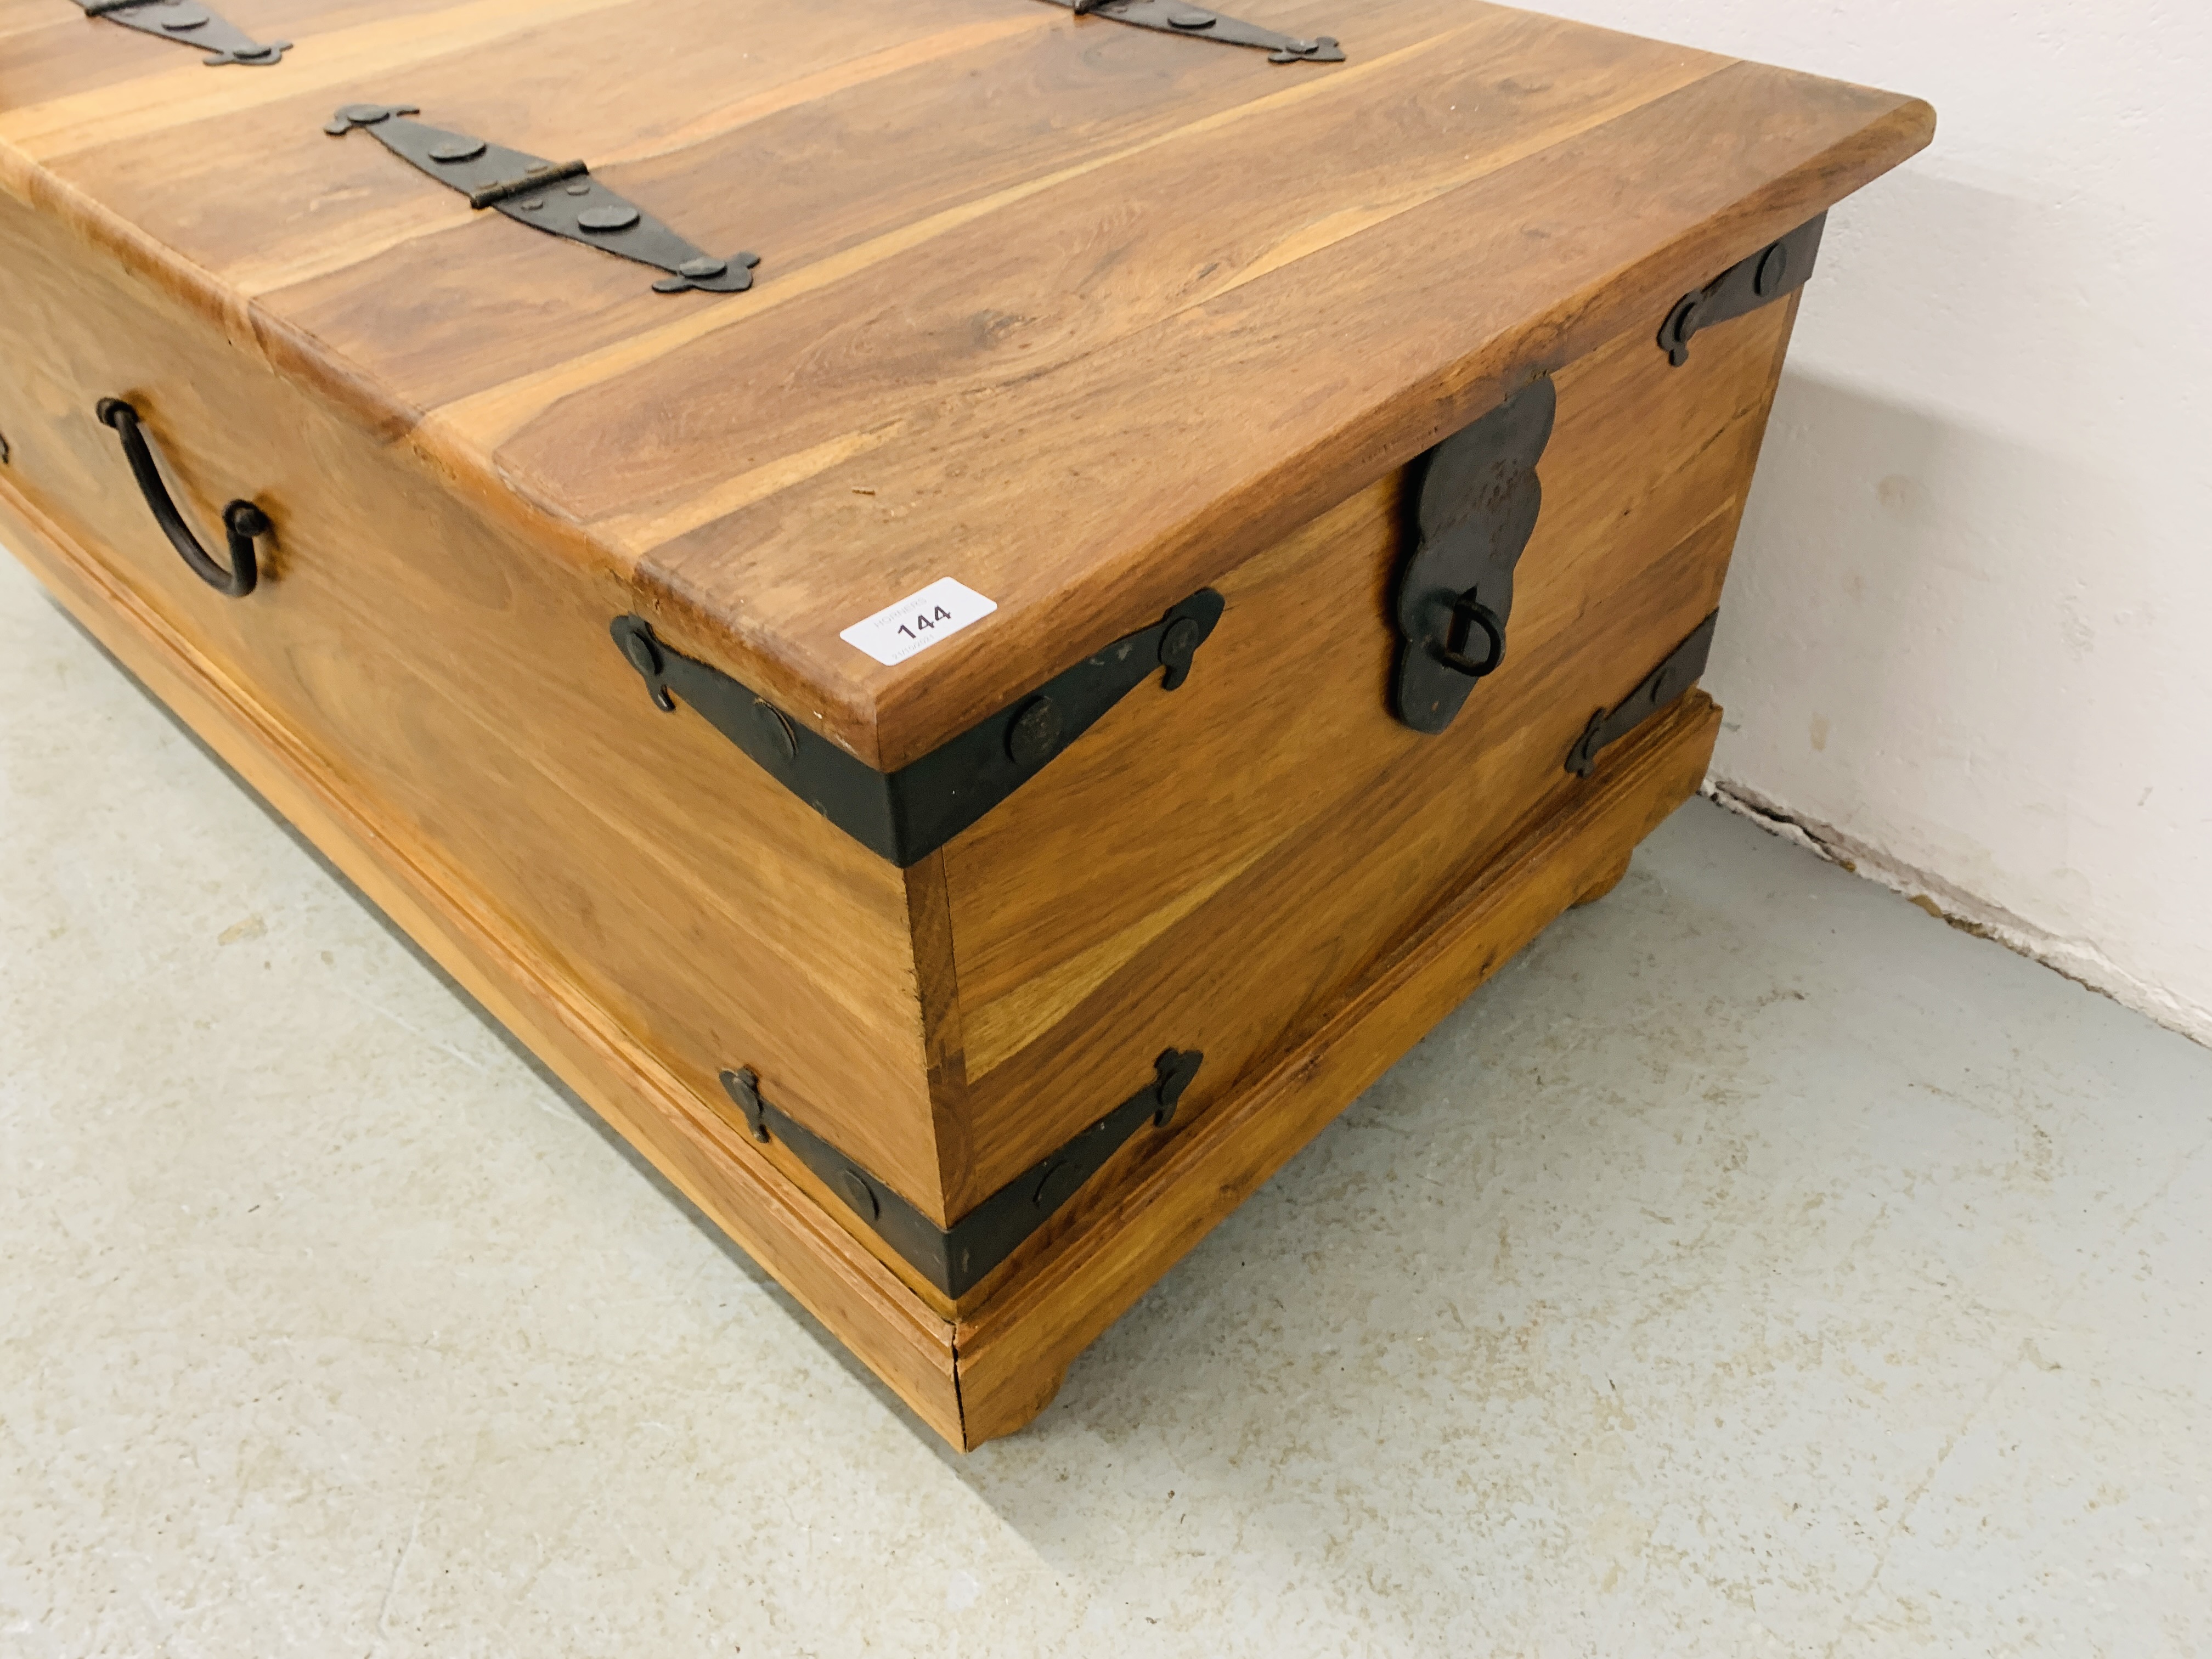 A MODERN HARD WOOD CHEST WITH METAL CRAFT HINGE AND DETAIL - Image 5 of 8